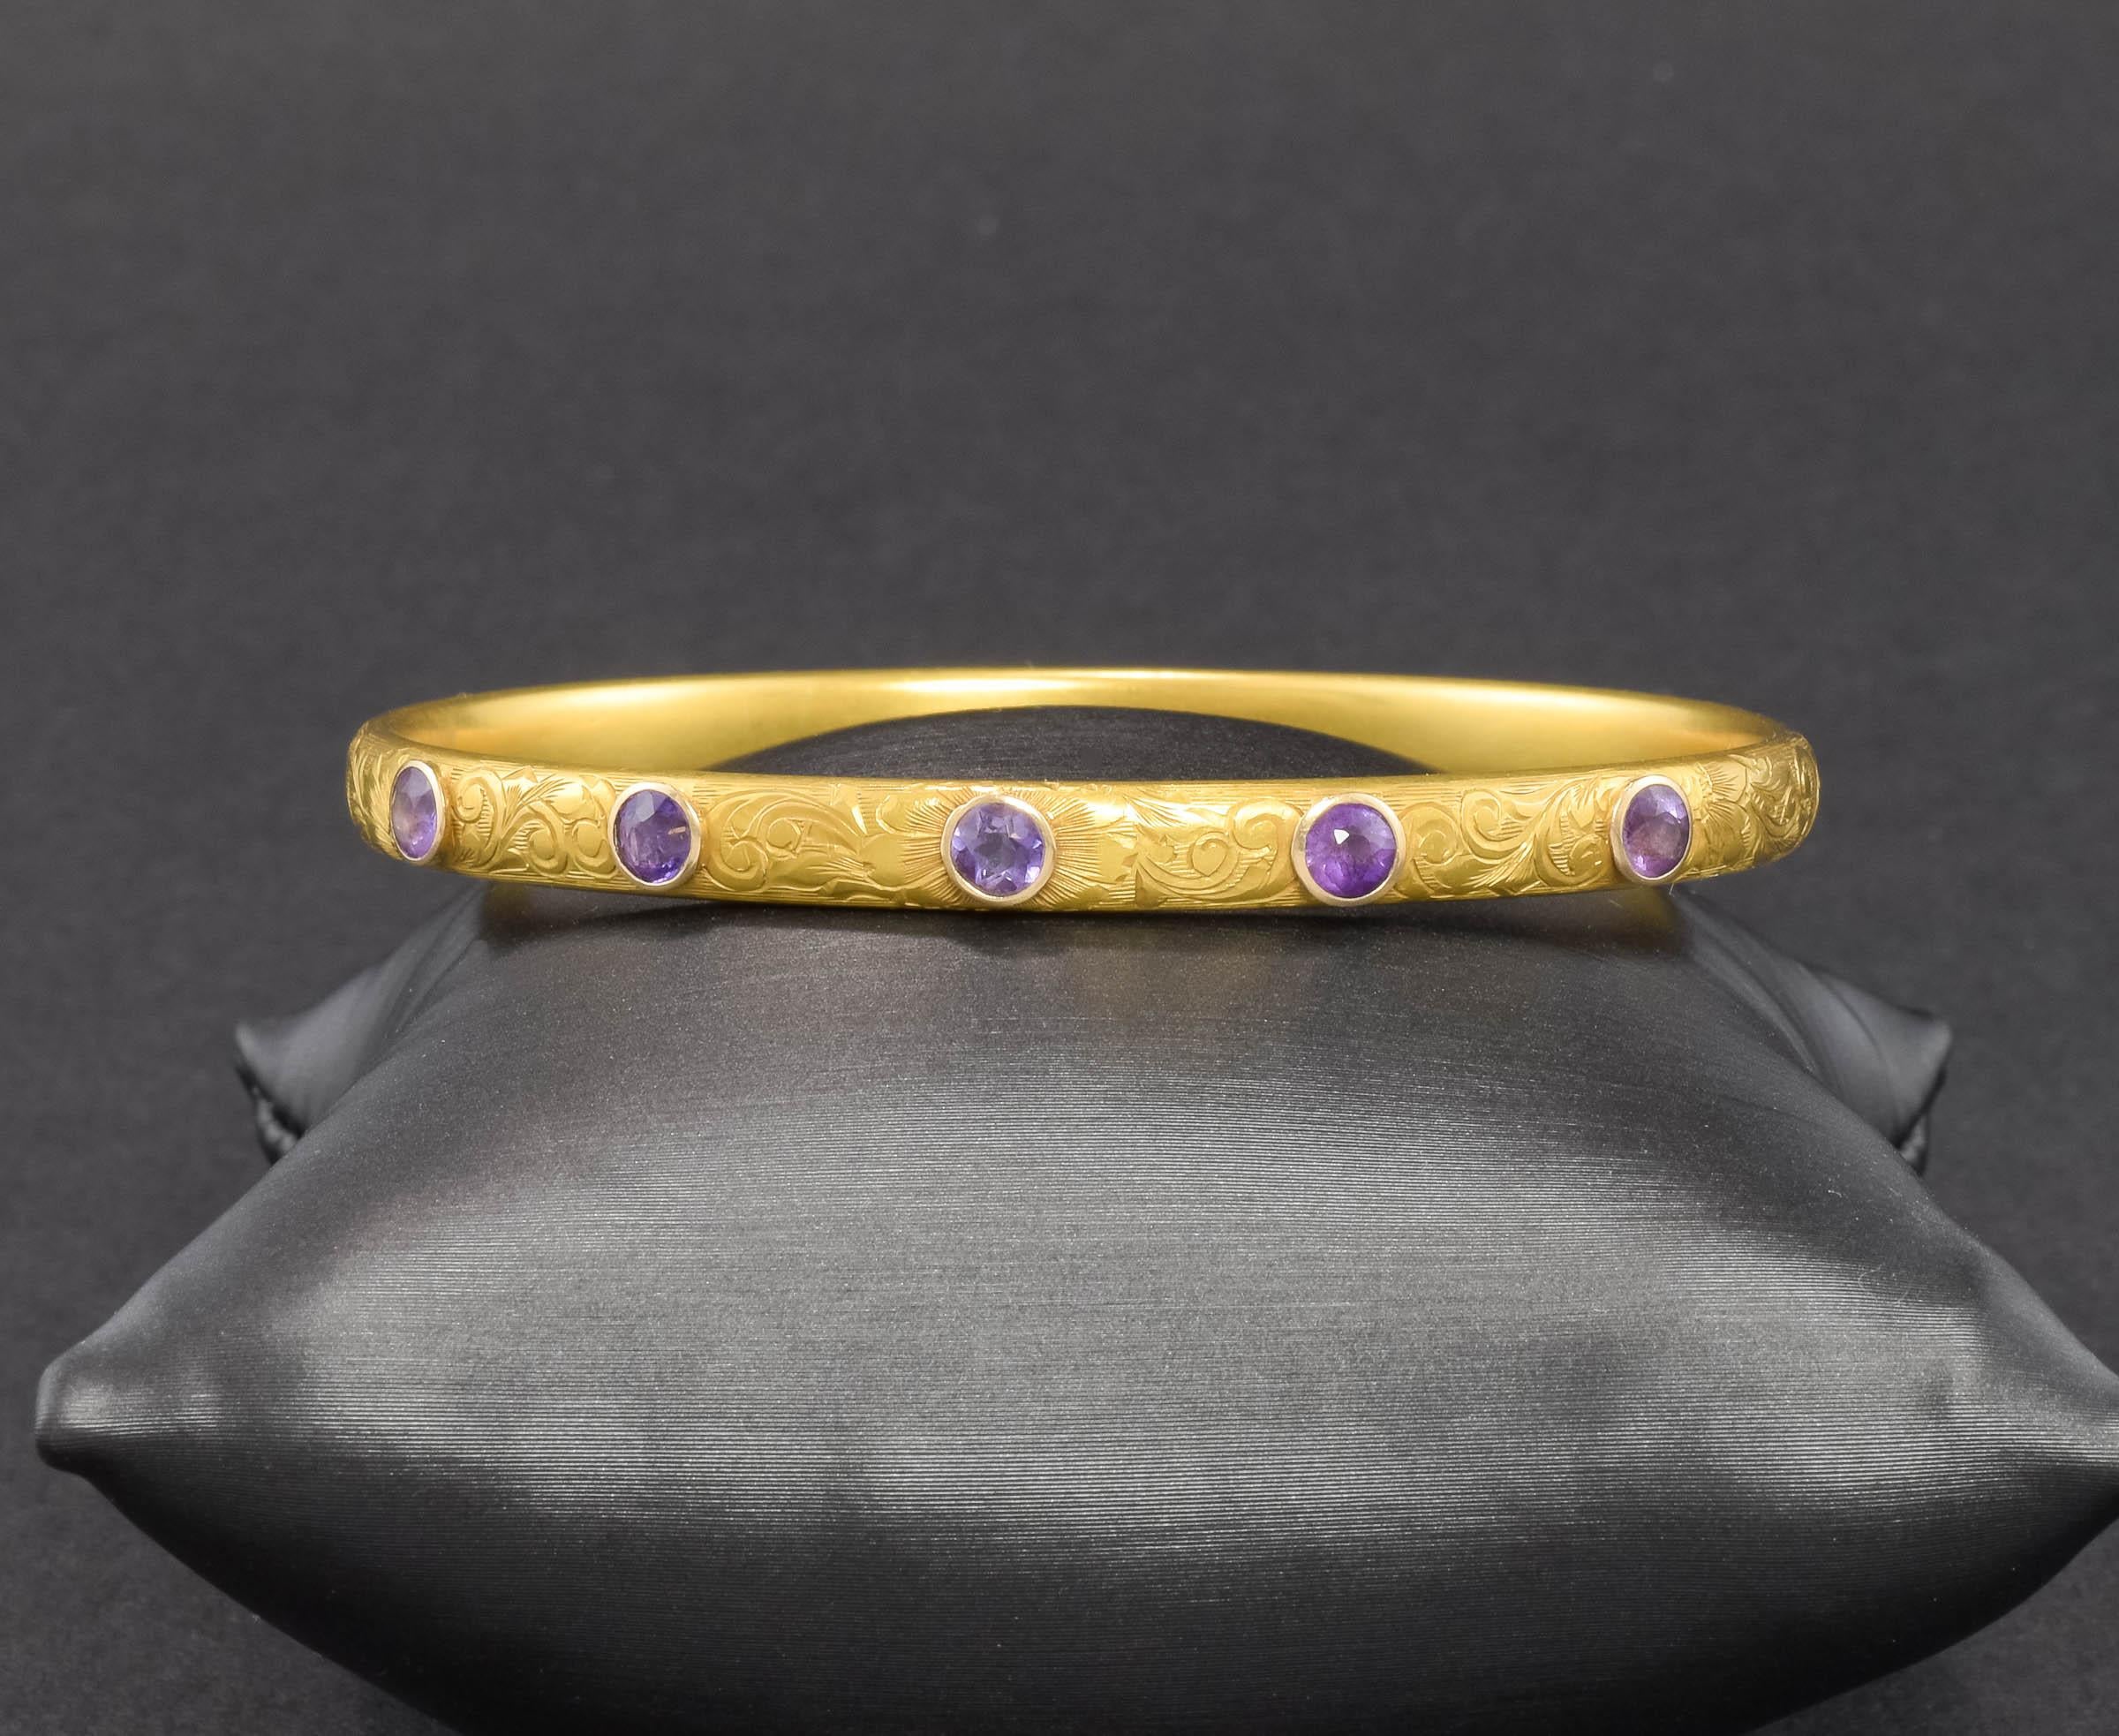 Art Nouveau period bangle bracelets by Krementz & Co are wonderful and this one is no exception.  Elegant and beautifully detailed, the splendid purple hue of the old cut amethysts is so luxurious against the rich color of the engraved gold.  It